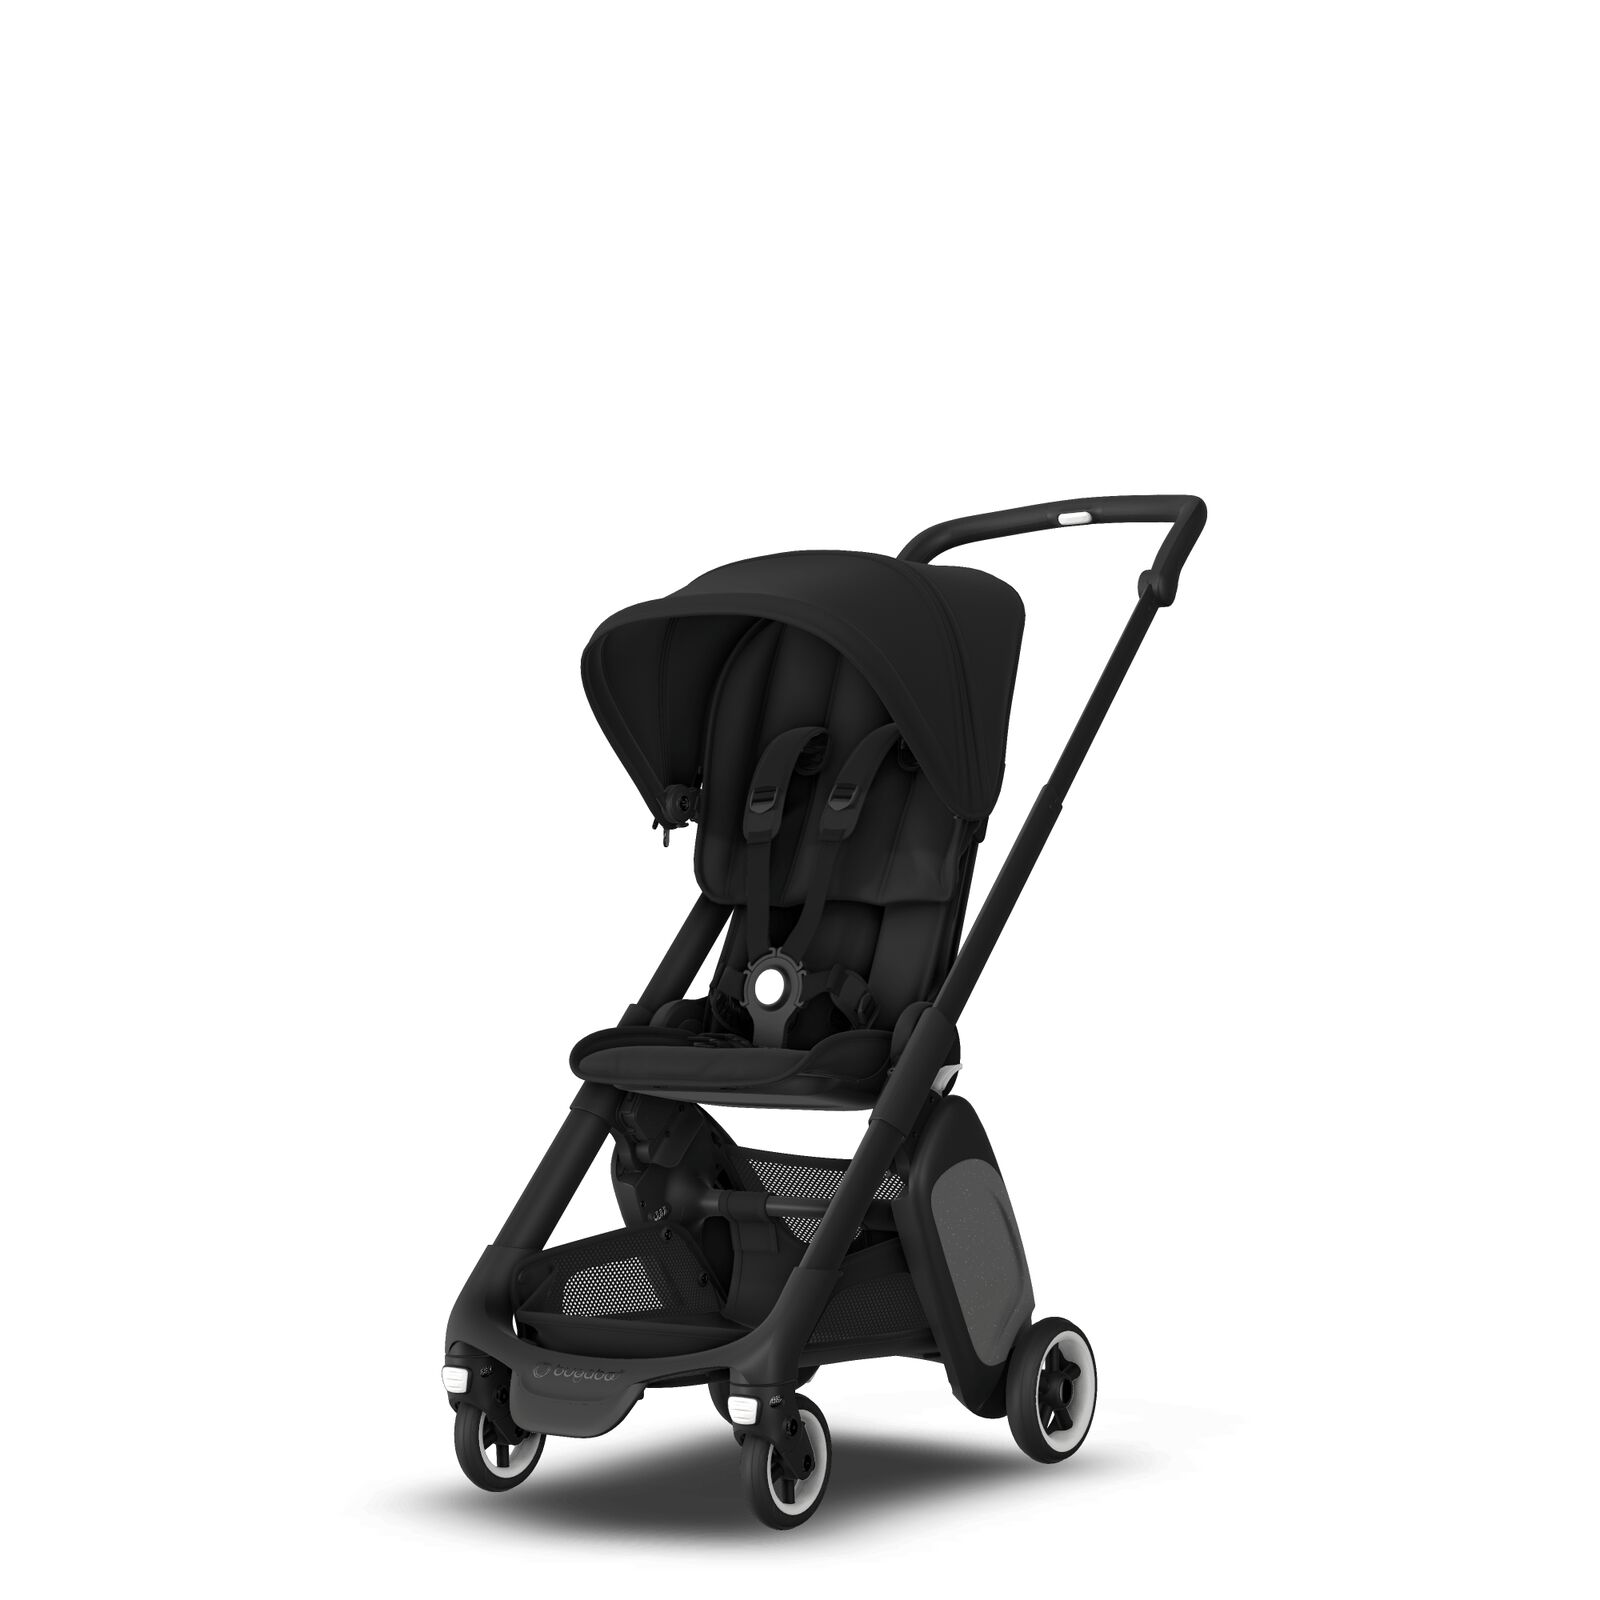 Bugaboo Ant ultra compact stroller - View 5